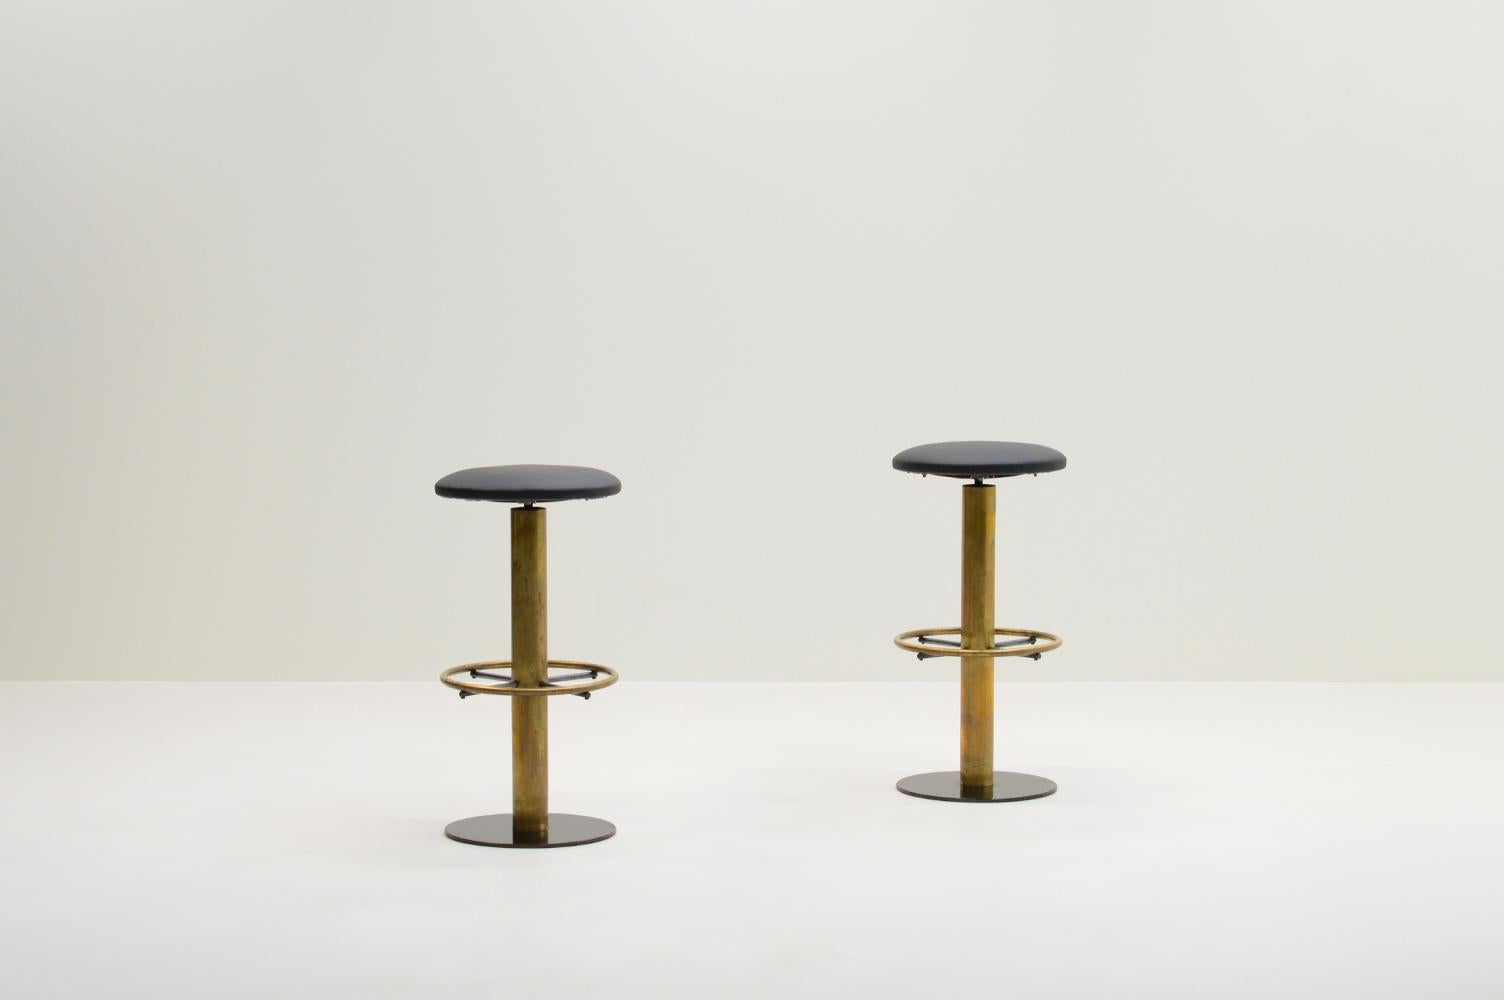 Set of 2 bar stools, 1950s Italy. The seats are reupholstered in black faux leather. They have a bearing swivel system. The base is made of Brass and metal. Heavy and sturdy stools. The brass has a nice patina. In good vintage condition. 

